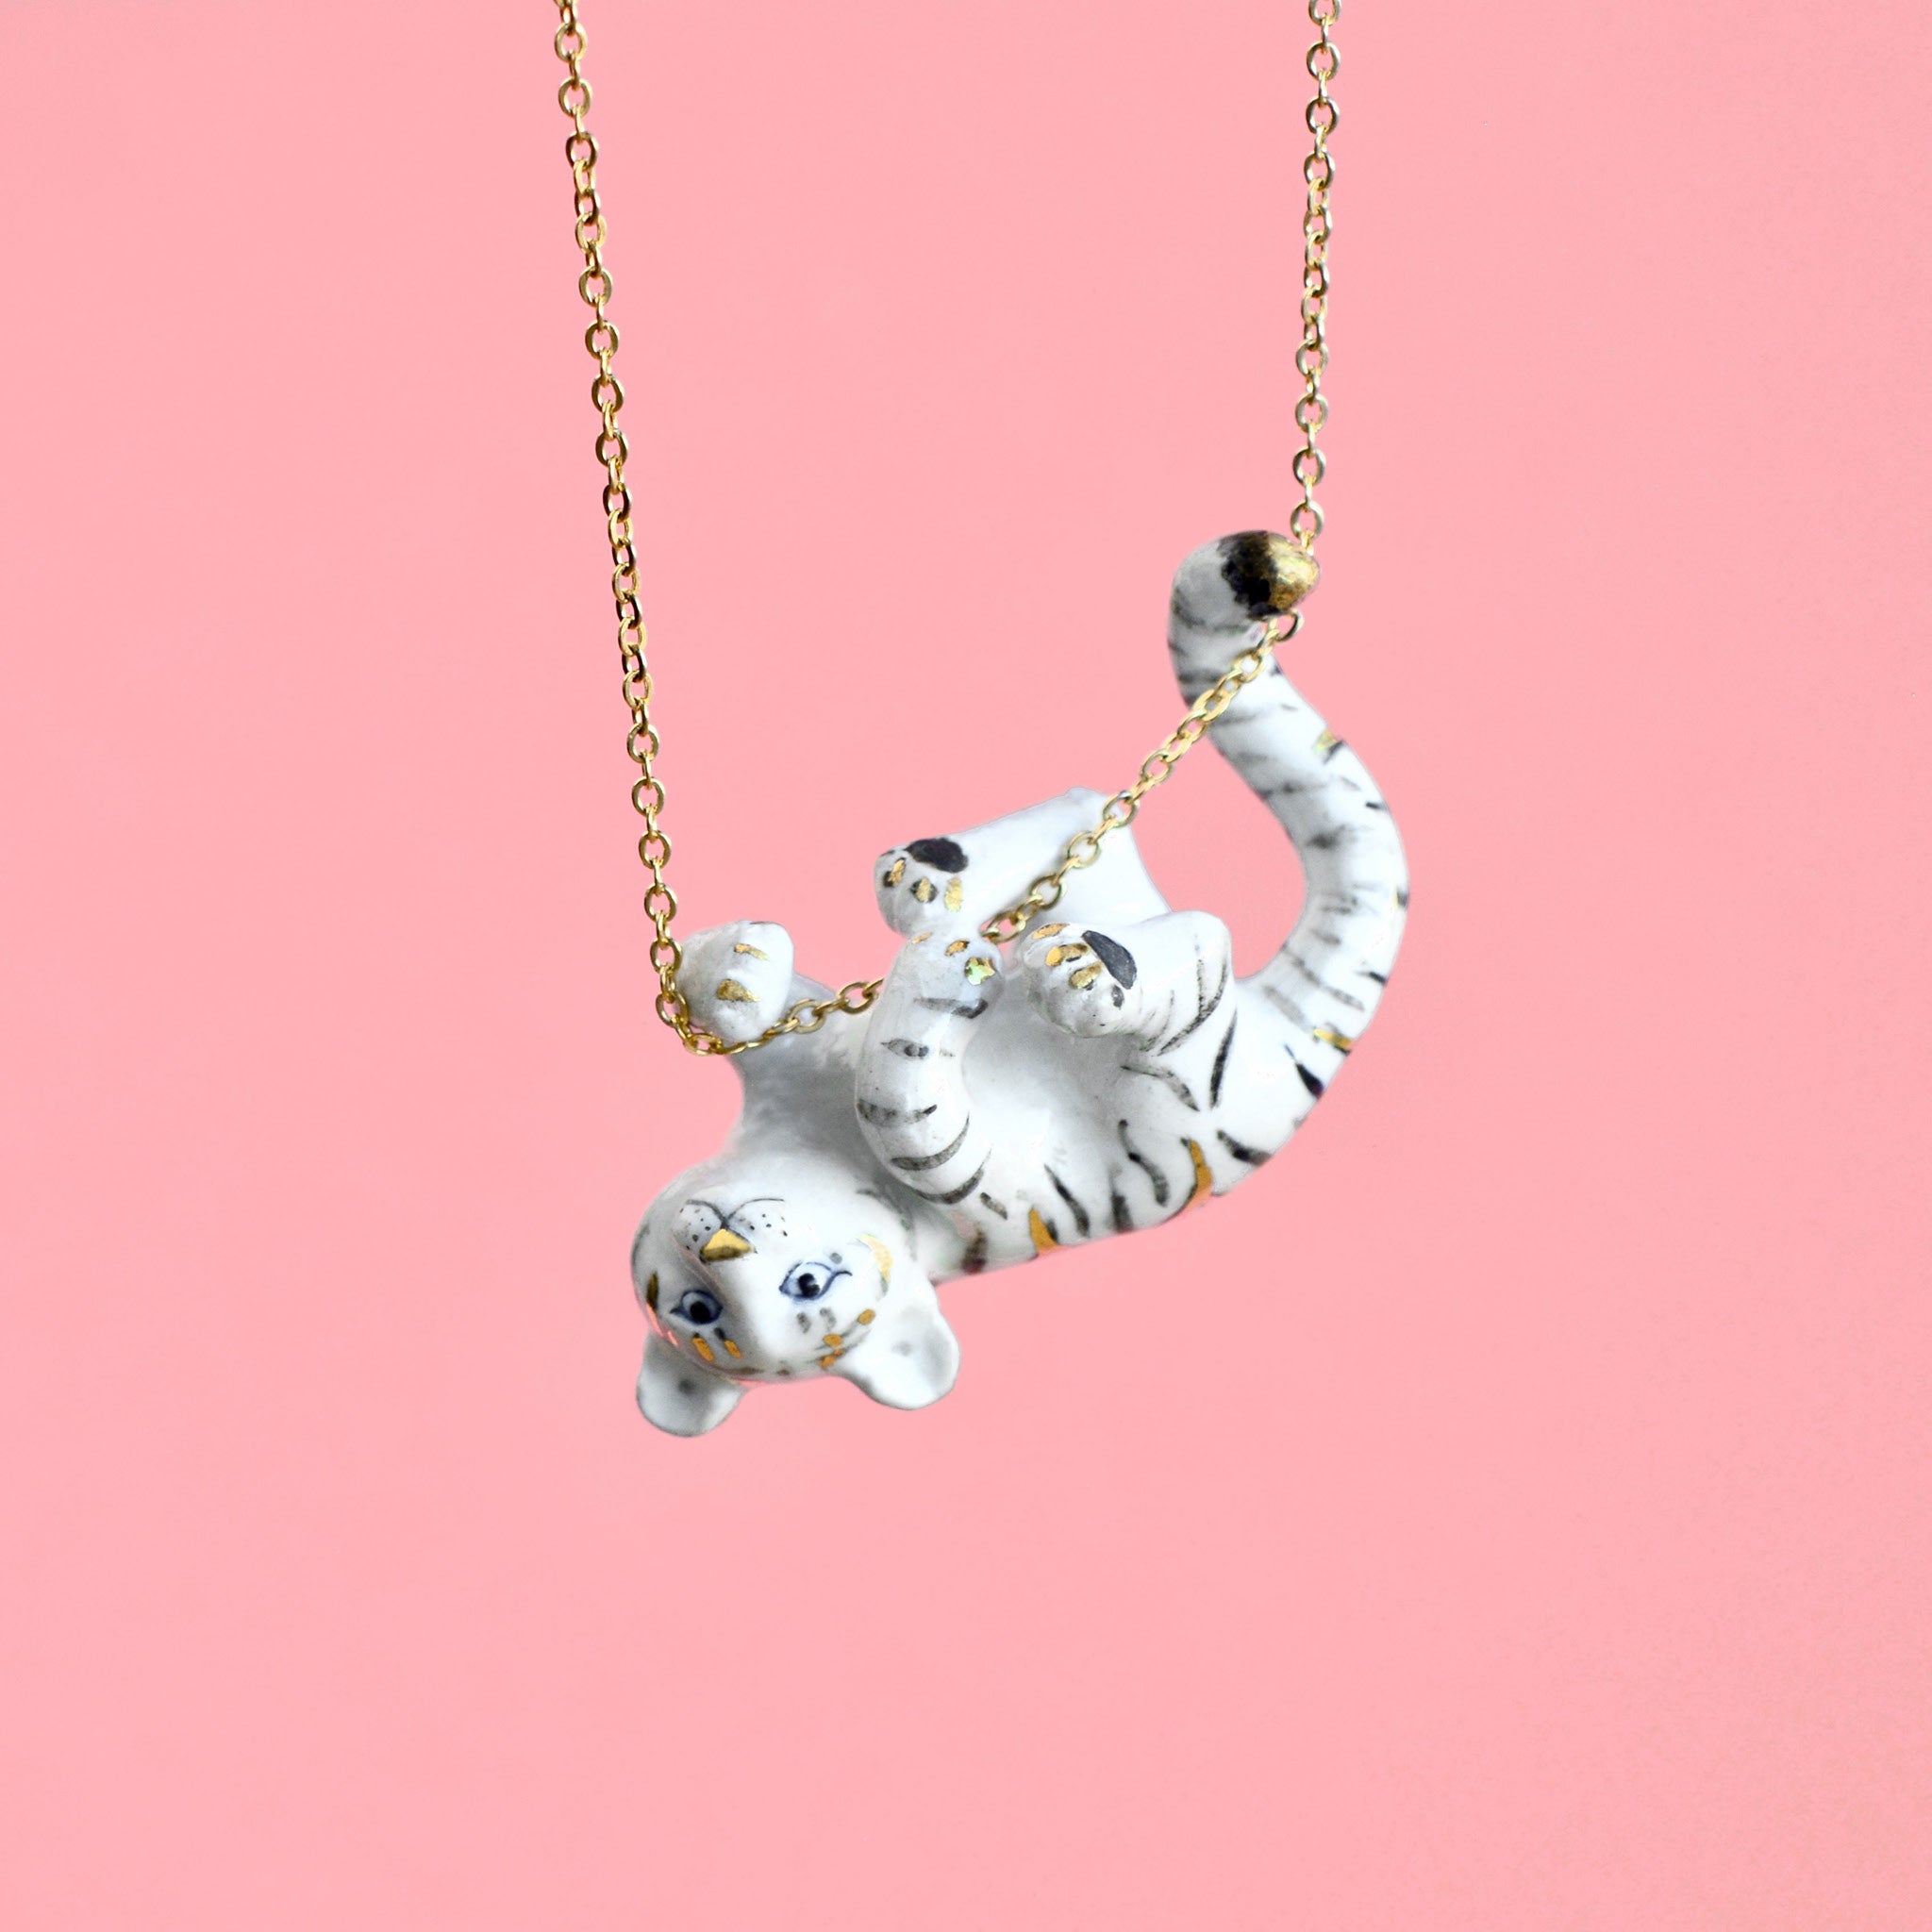 White Tiger Necklace | Camp Hollow Ceramic Animal Jewelry